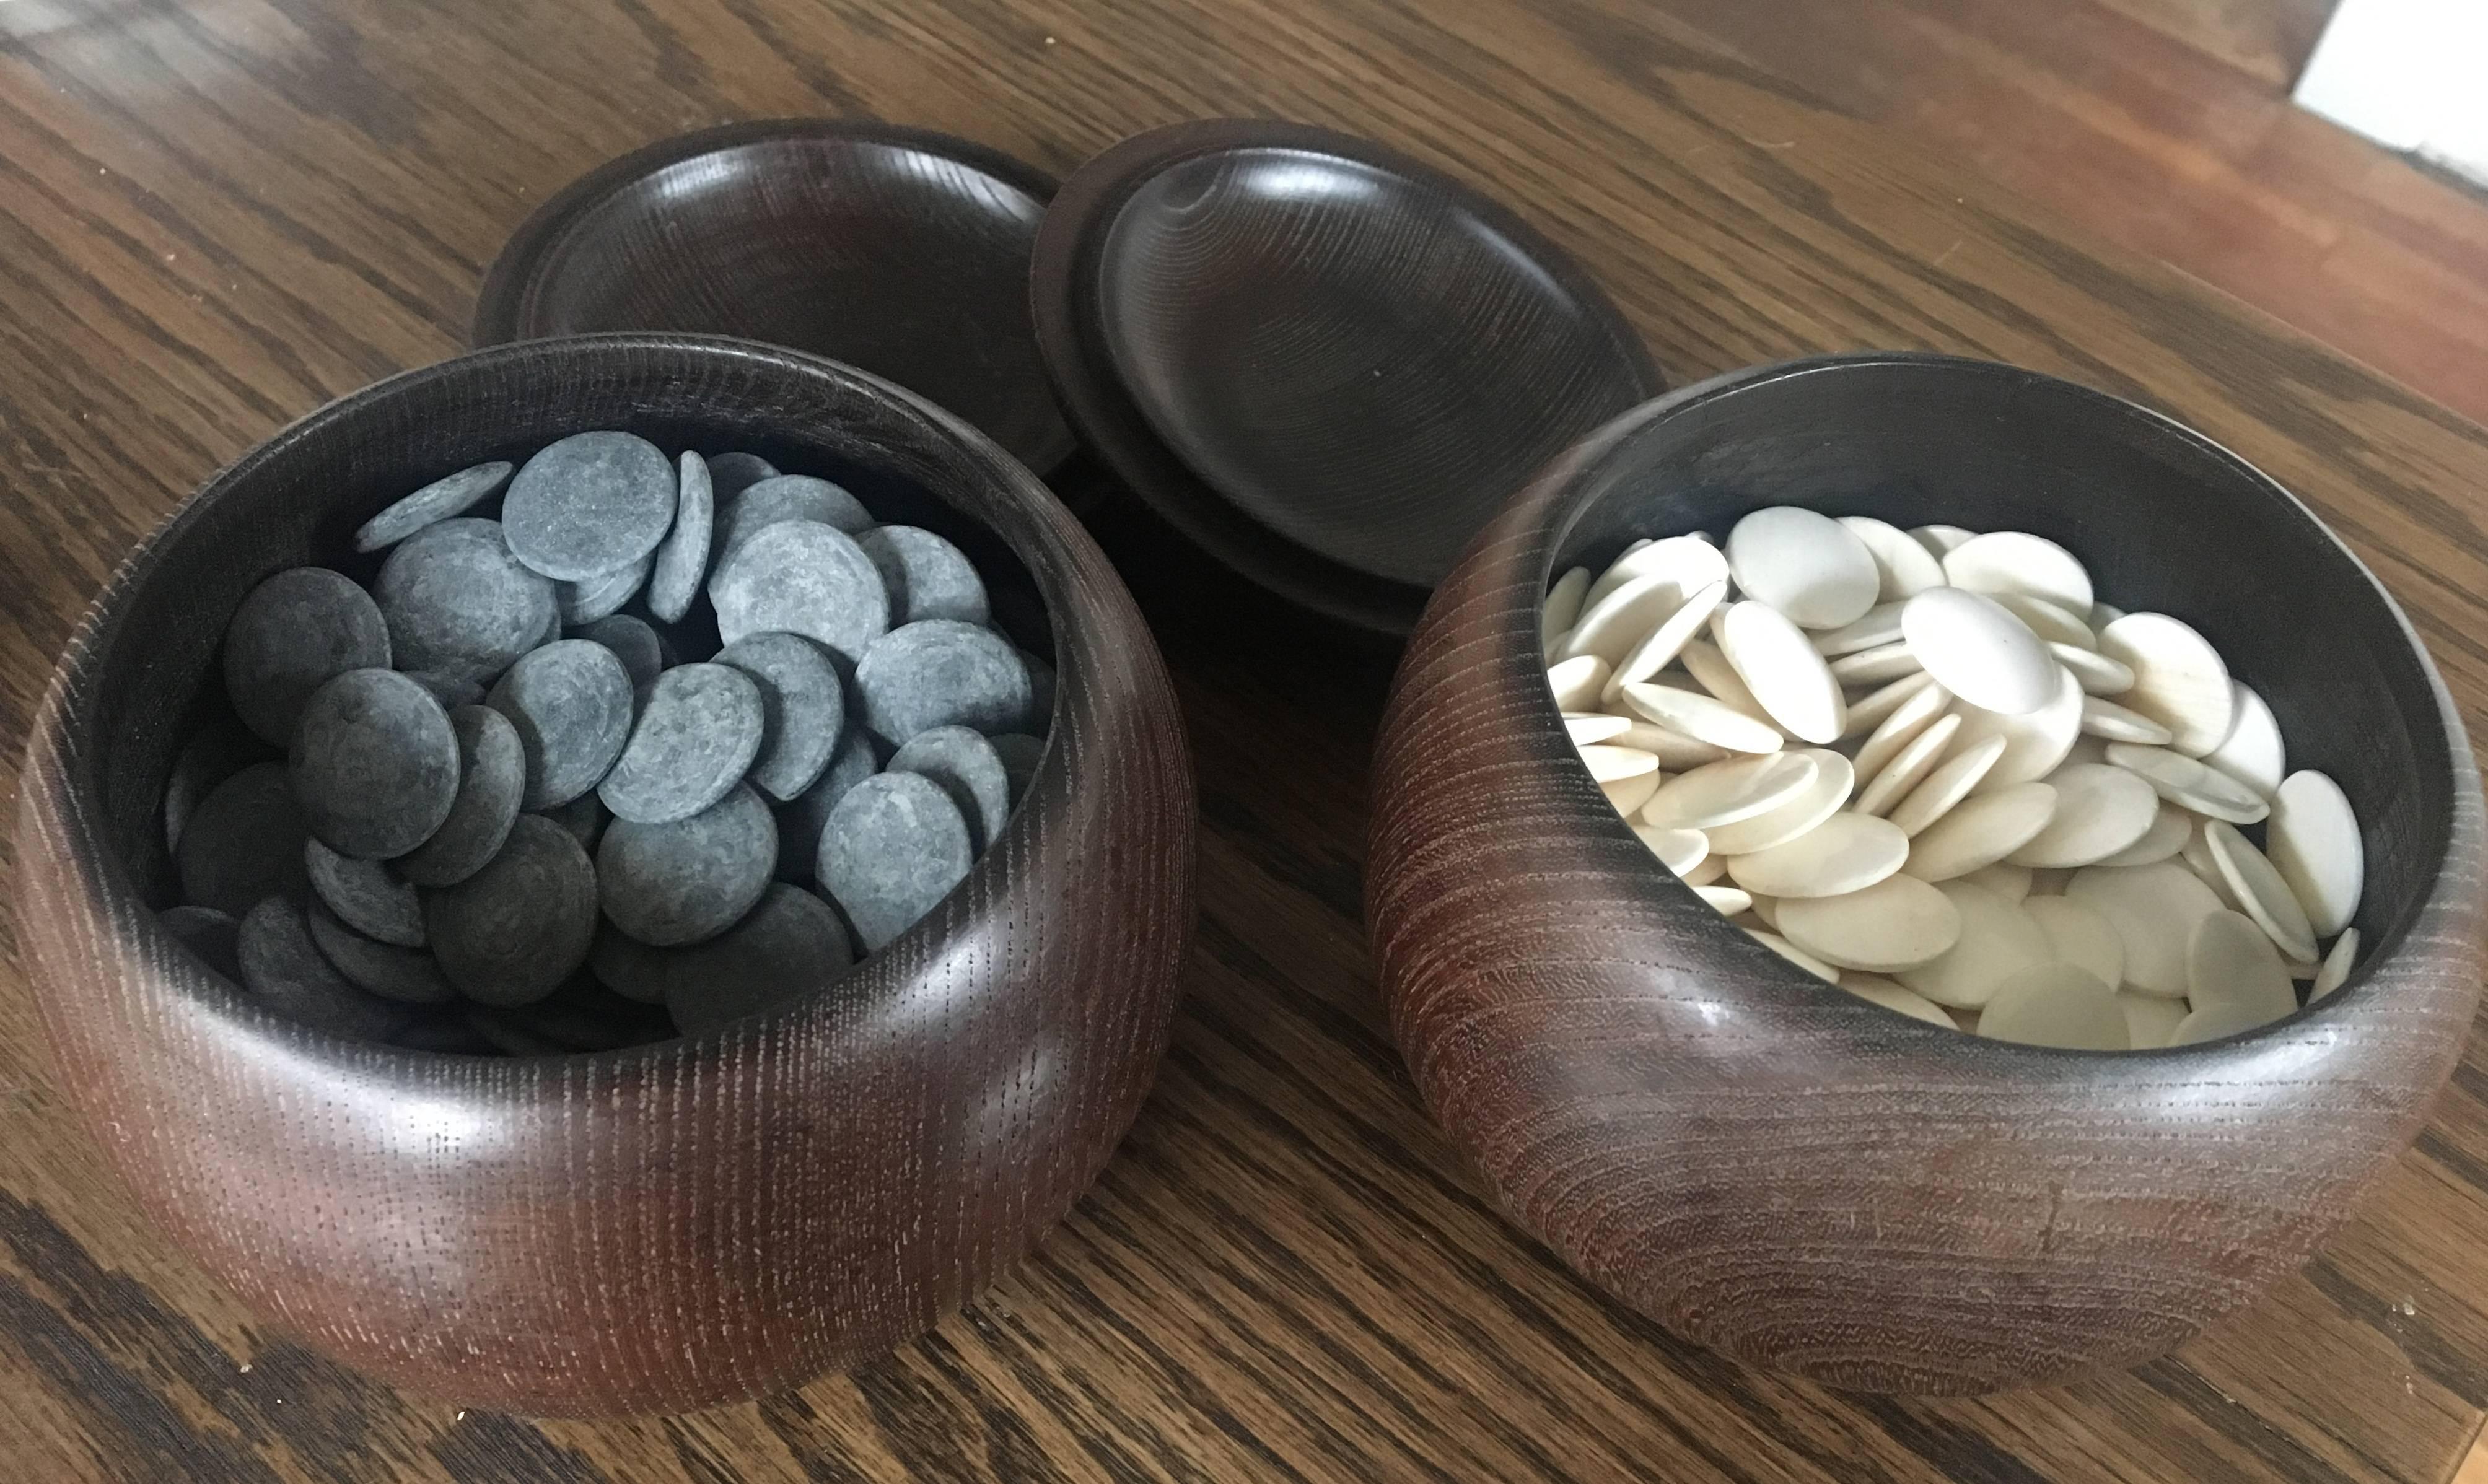 Beautiful set of Japanese go game playing chips made from shell and slate. Both chips are house in a simple wooden bowl with lid. Purchased at Takashimaya. 

This game was invented in ancient China more than 2,500 years ago, and is the oldest